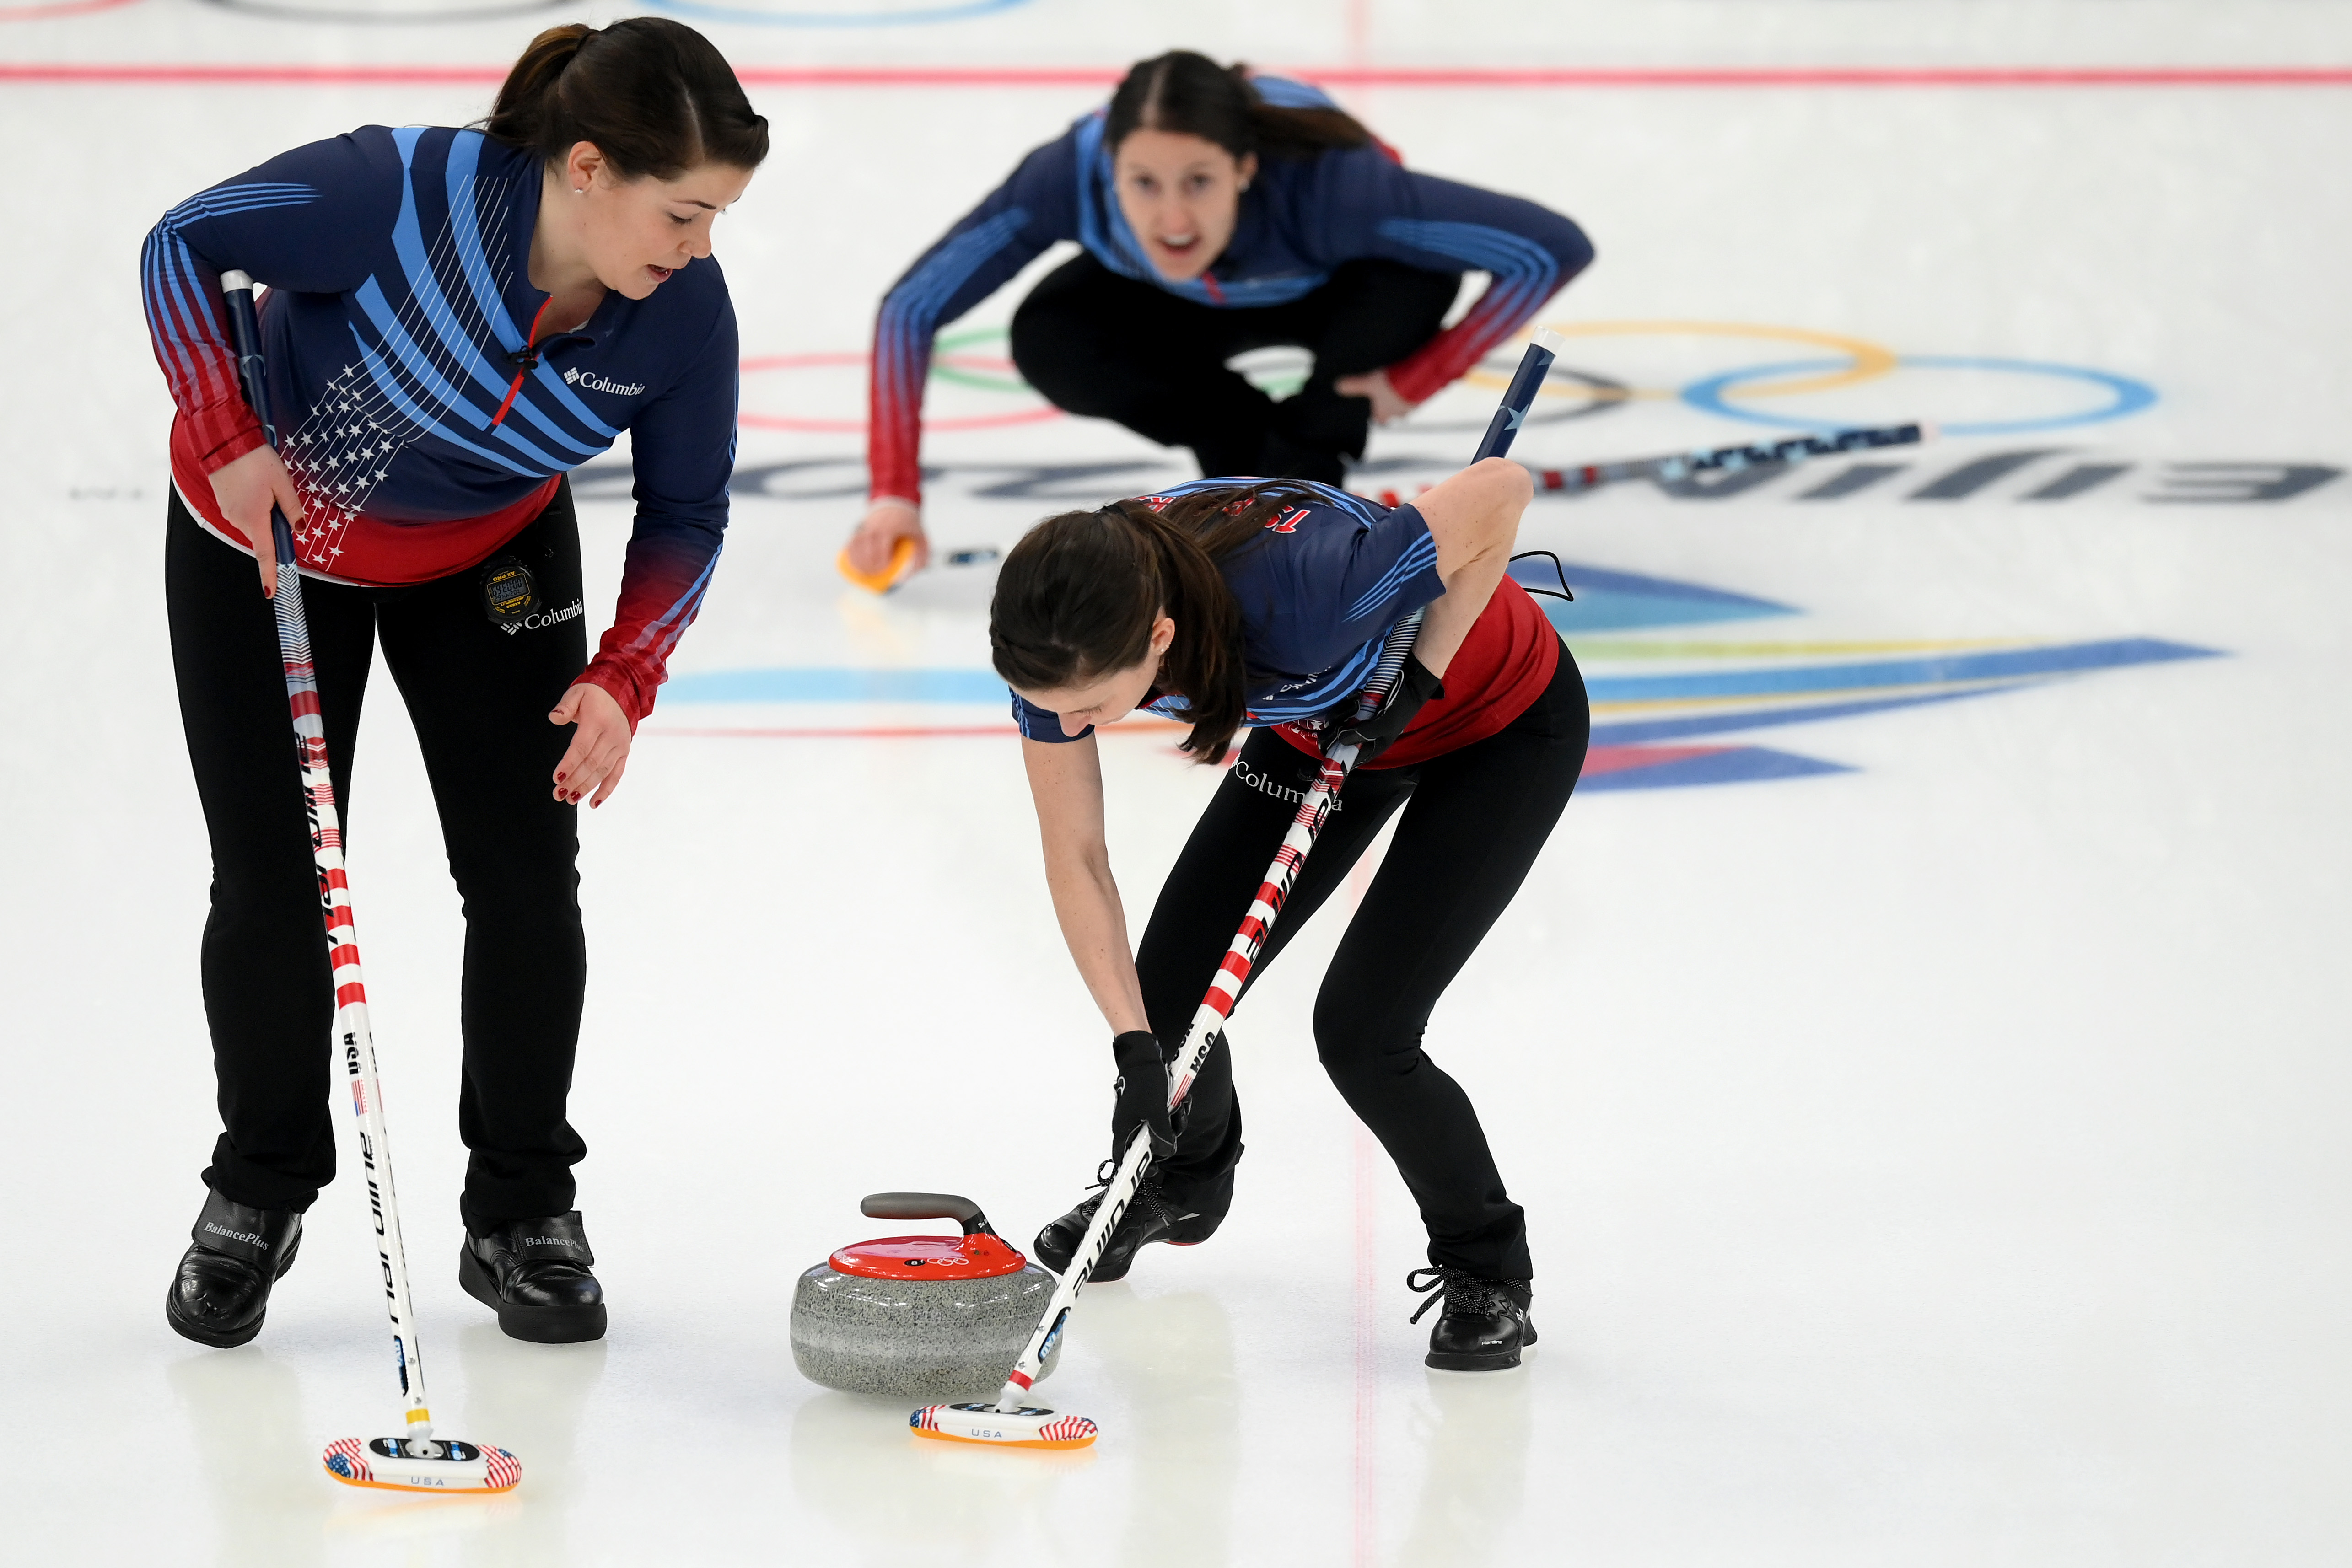 Sweden Tops Team USA in Women's Curling – NBC 6 South Florida